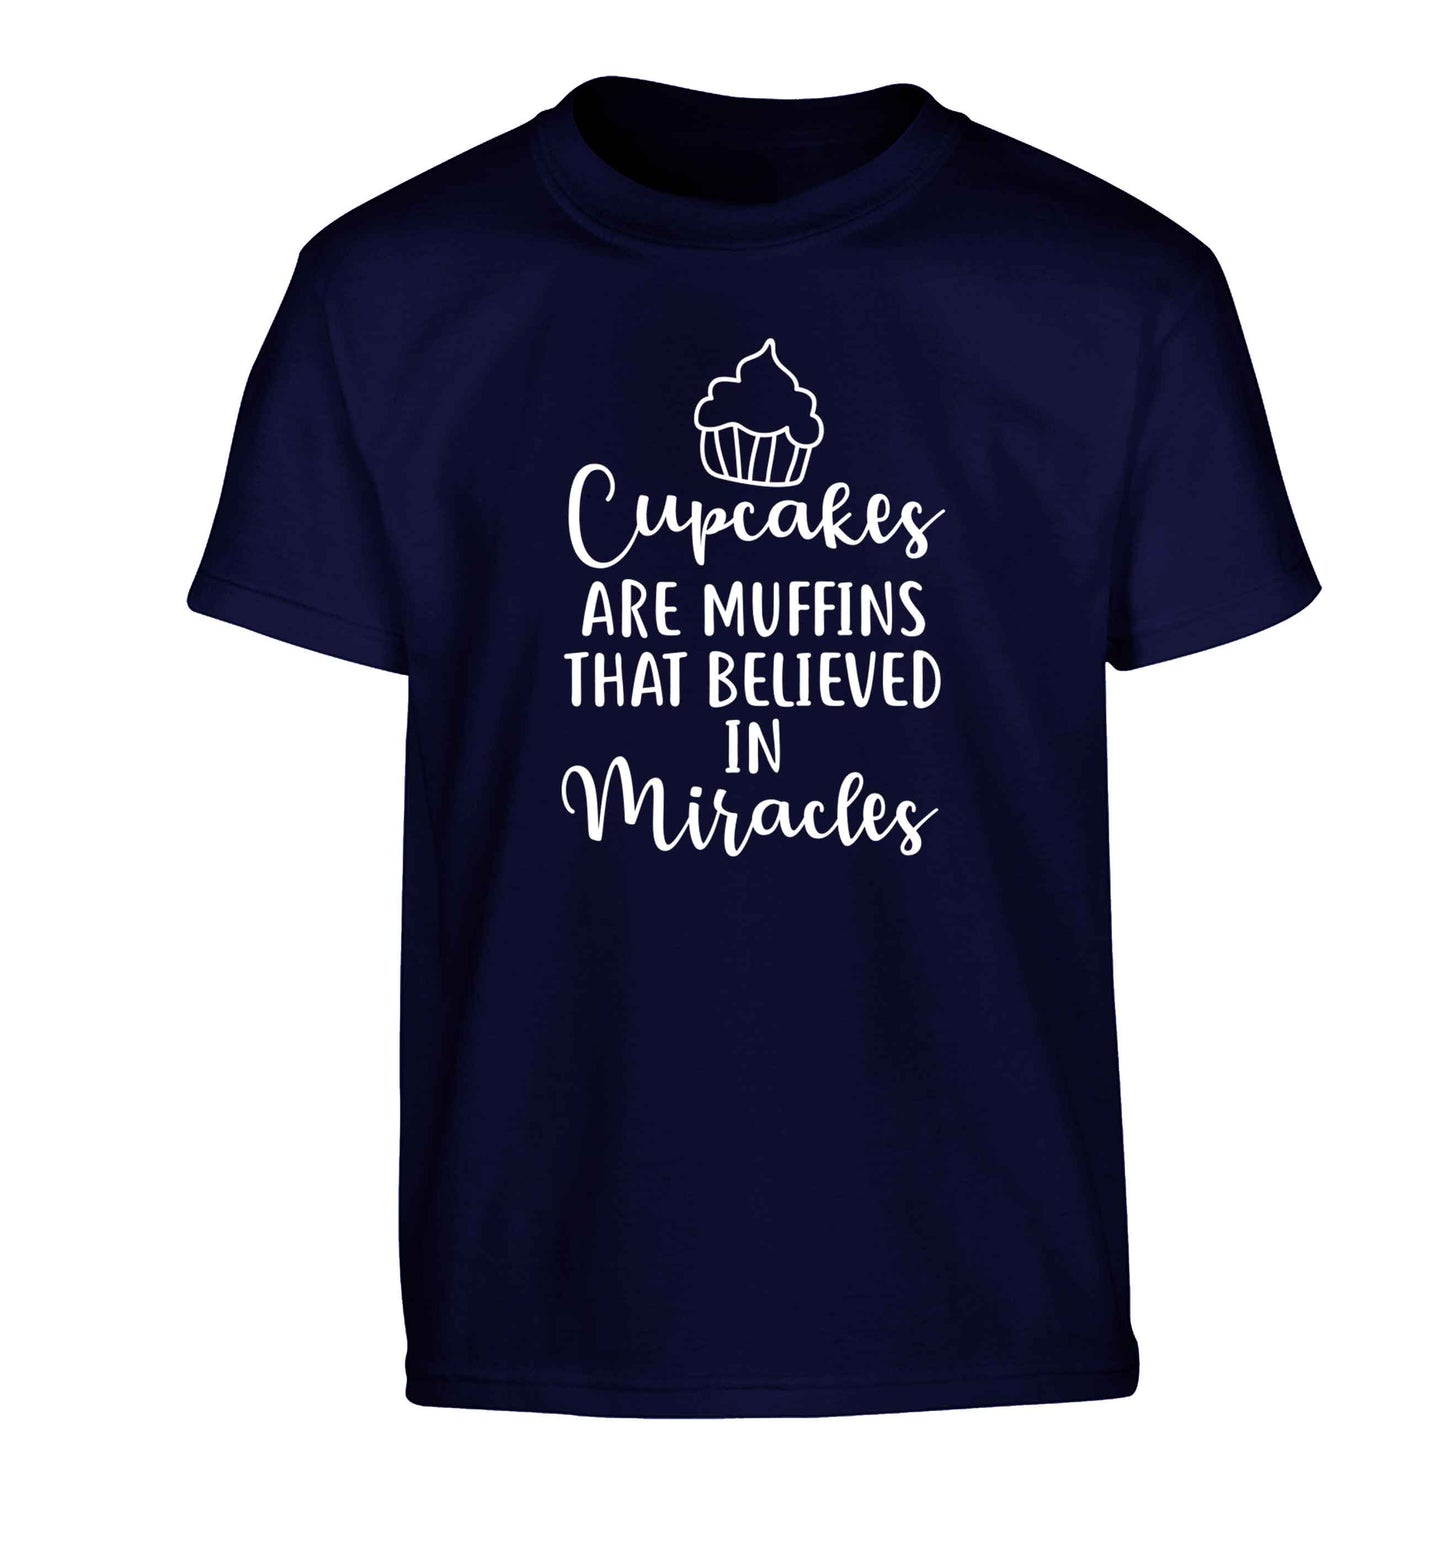 Cupcakes muffins that believed in miracles Children's navy Tshirt 12-13 Years